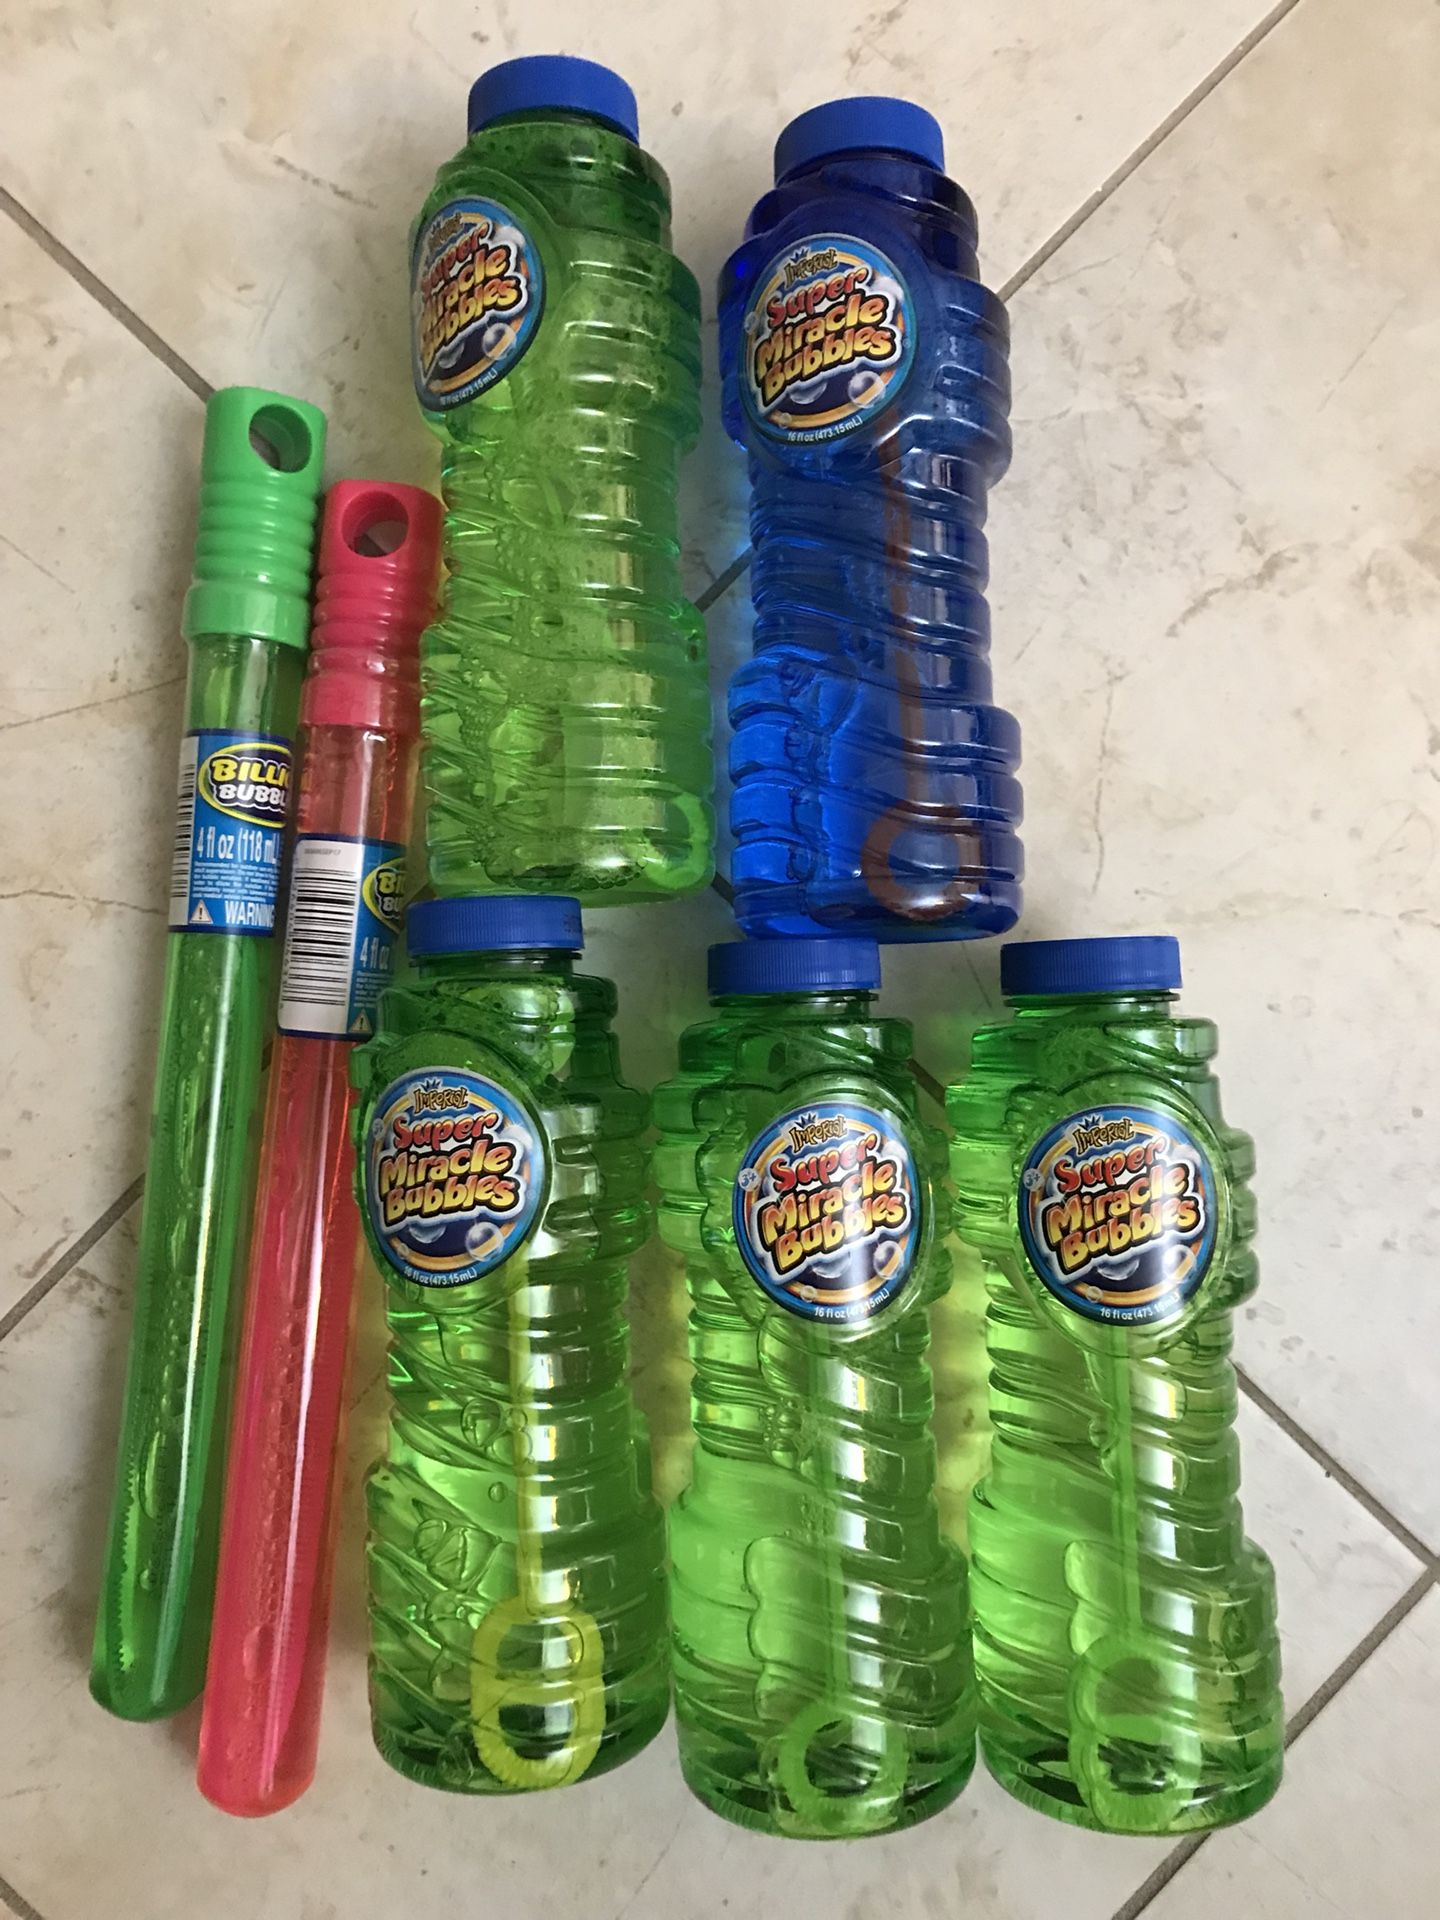 Brand new miracle bubbles all for $3